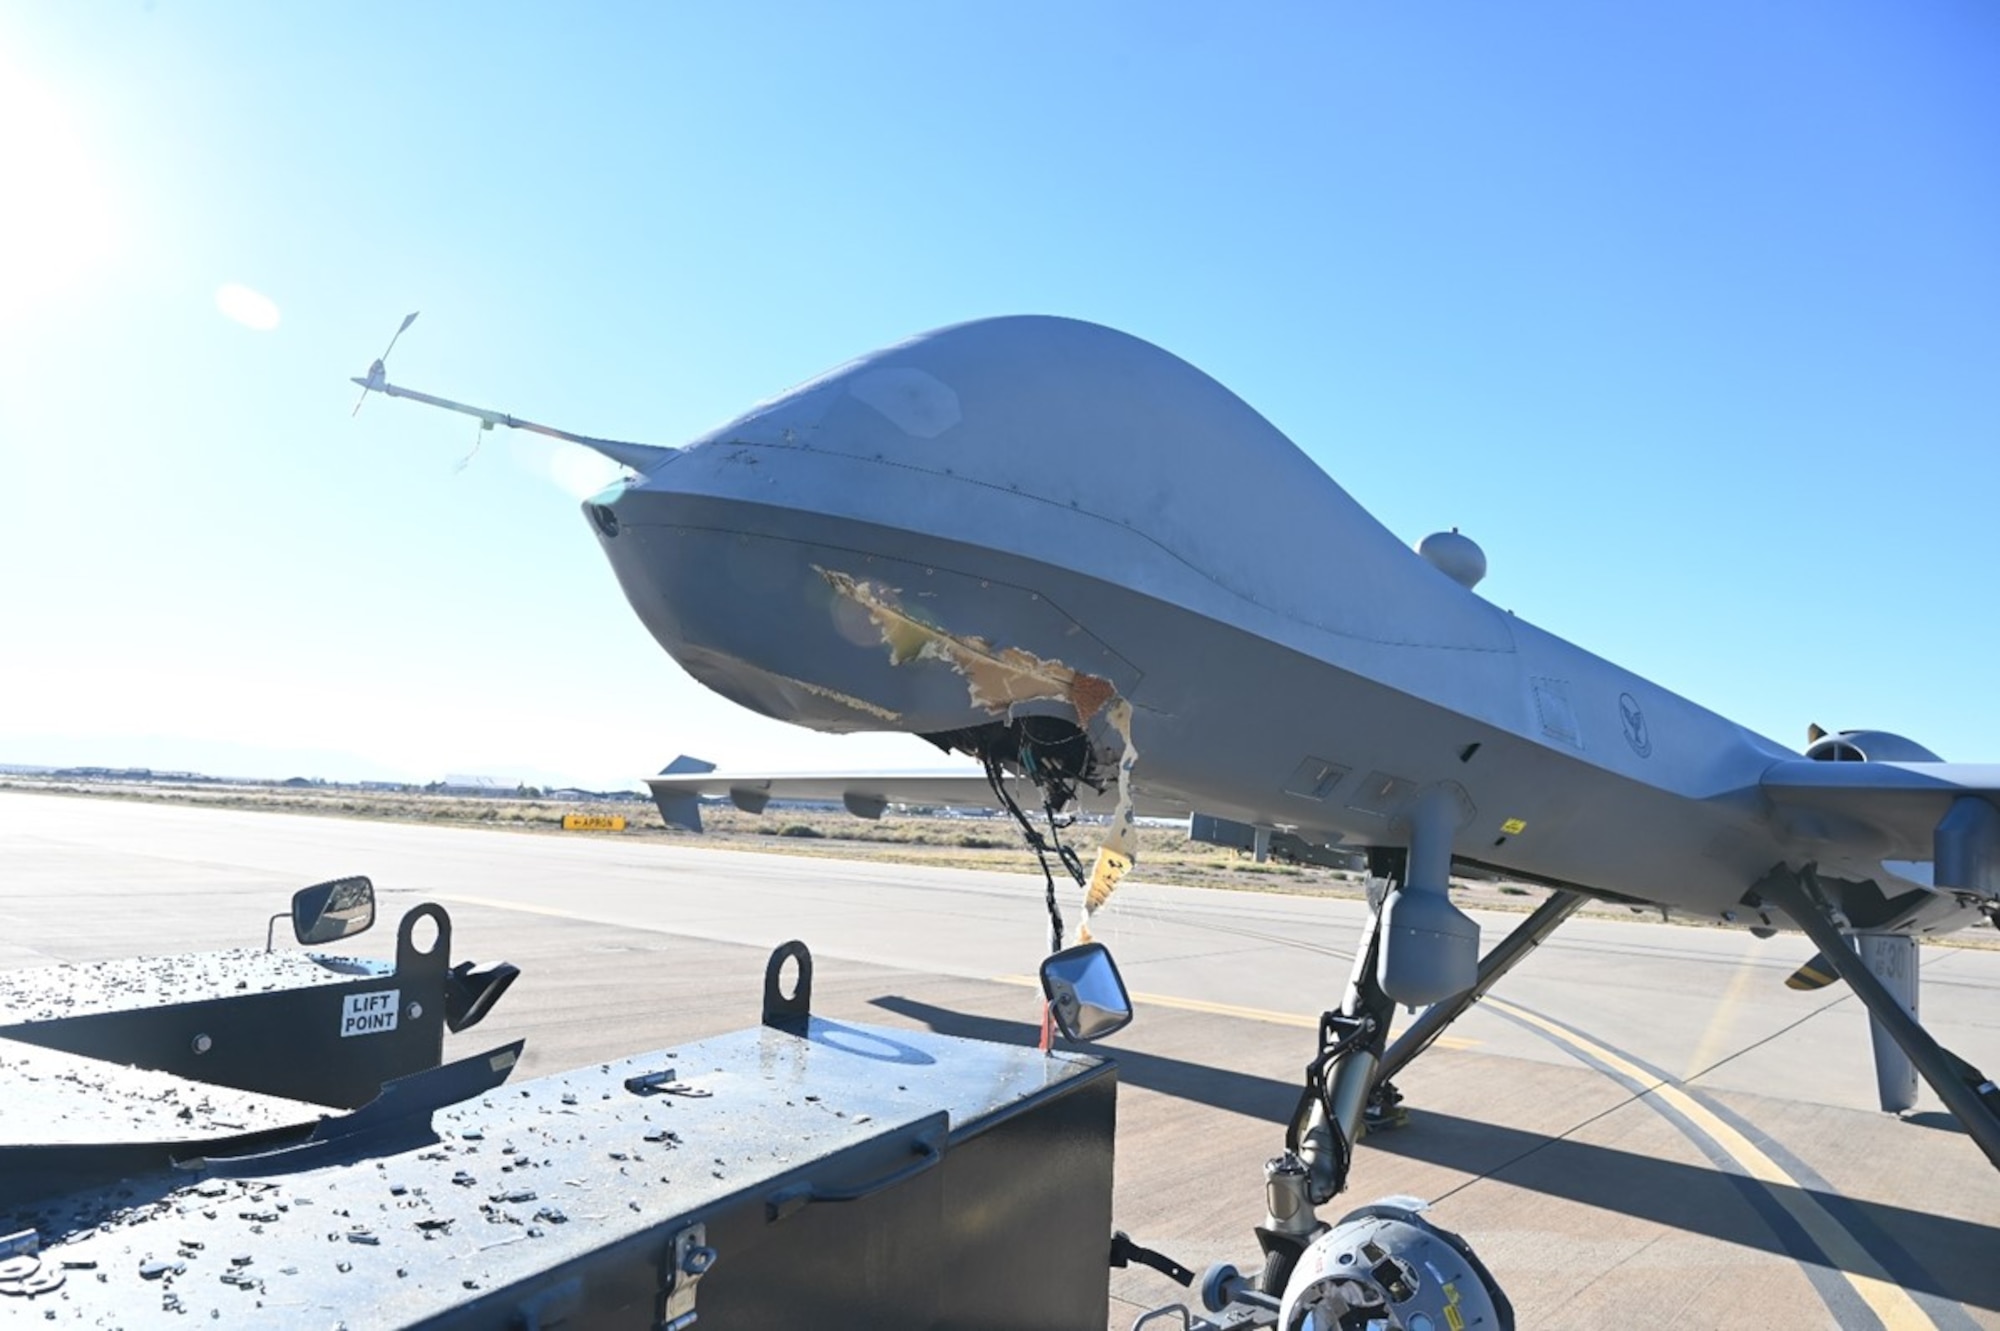 Preventable aircraft maintenance mishaps, such as the damage to this MQ-9 Reaper during a towing incident, have cost AETC tens of millions of dollars over the past five years. The damage to this MQ-9 alone cost more than $3 million. Command leadership hopes new, innovative aircraft maintenance ORM initiatives will reverse this negative trend.